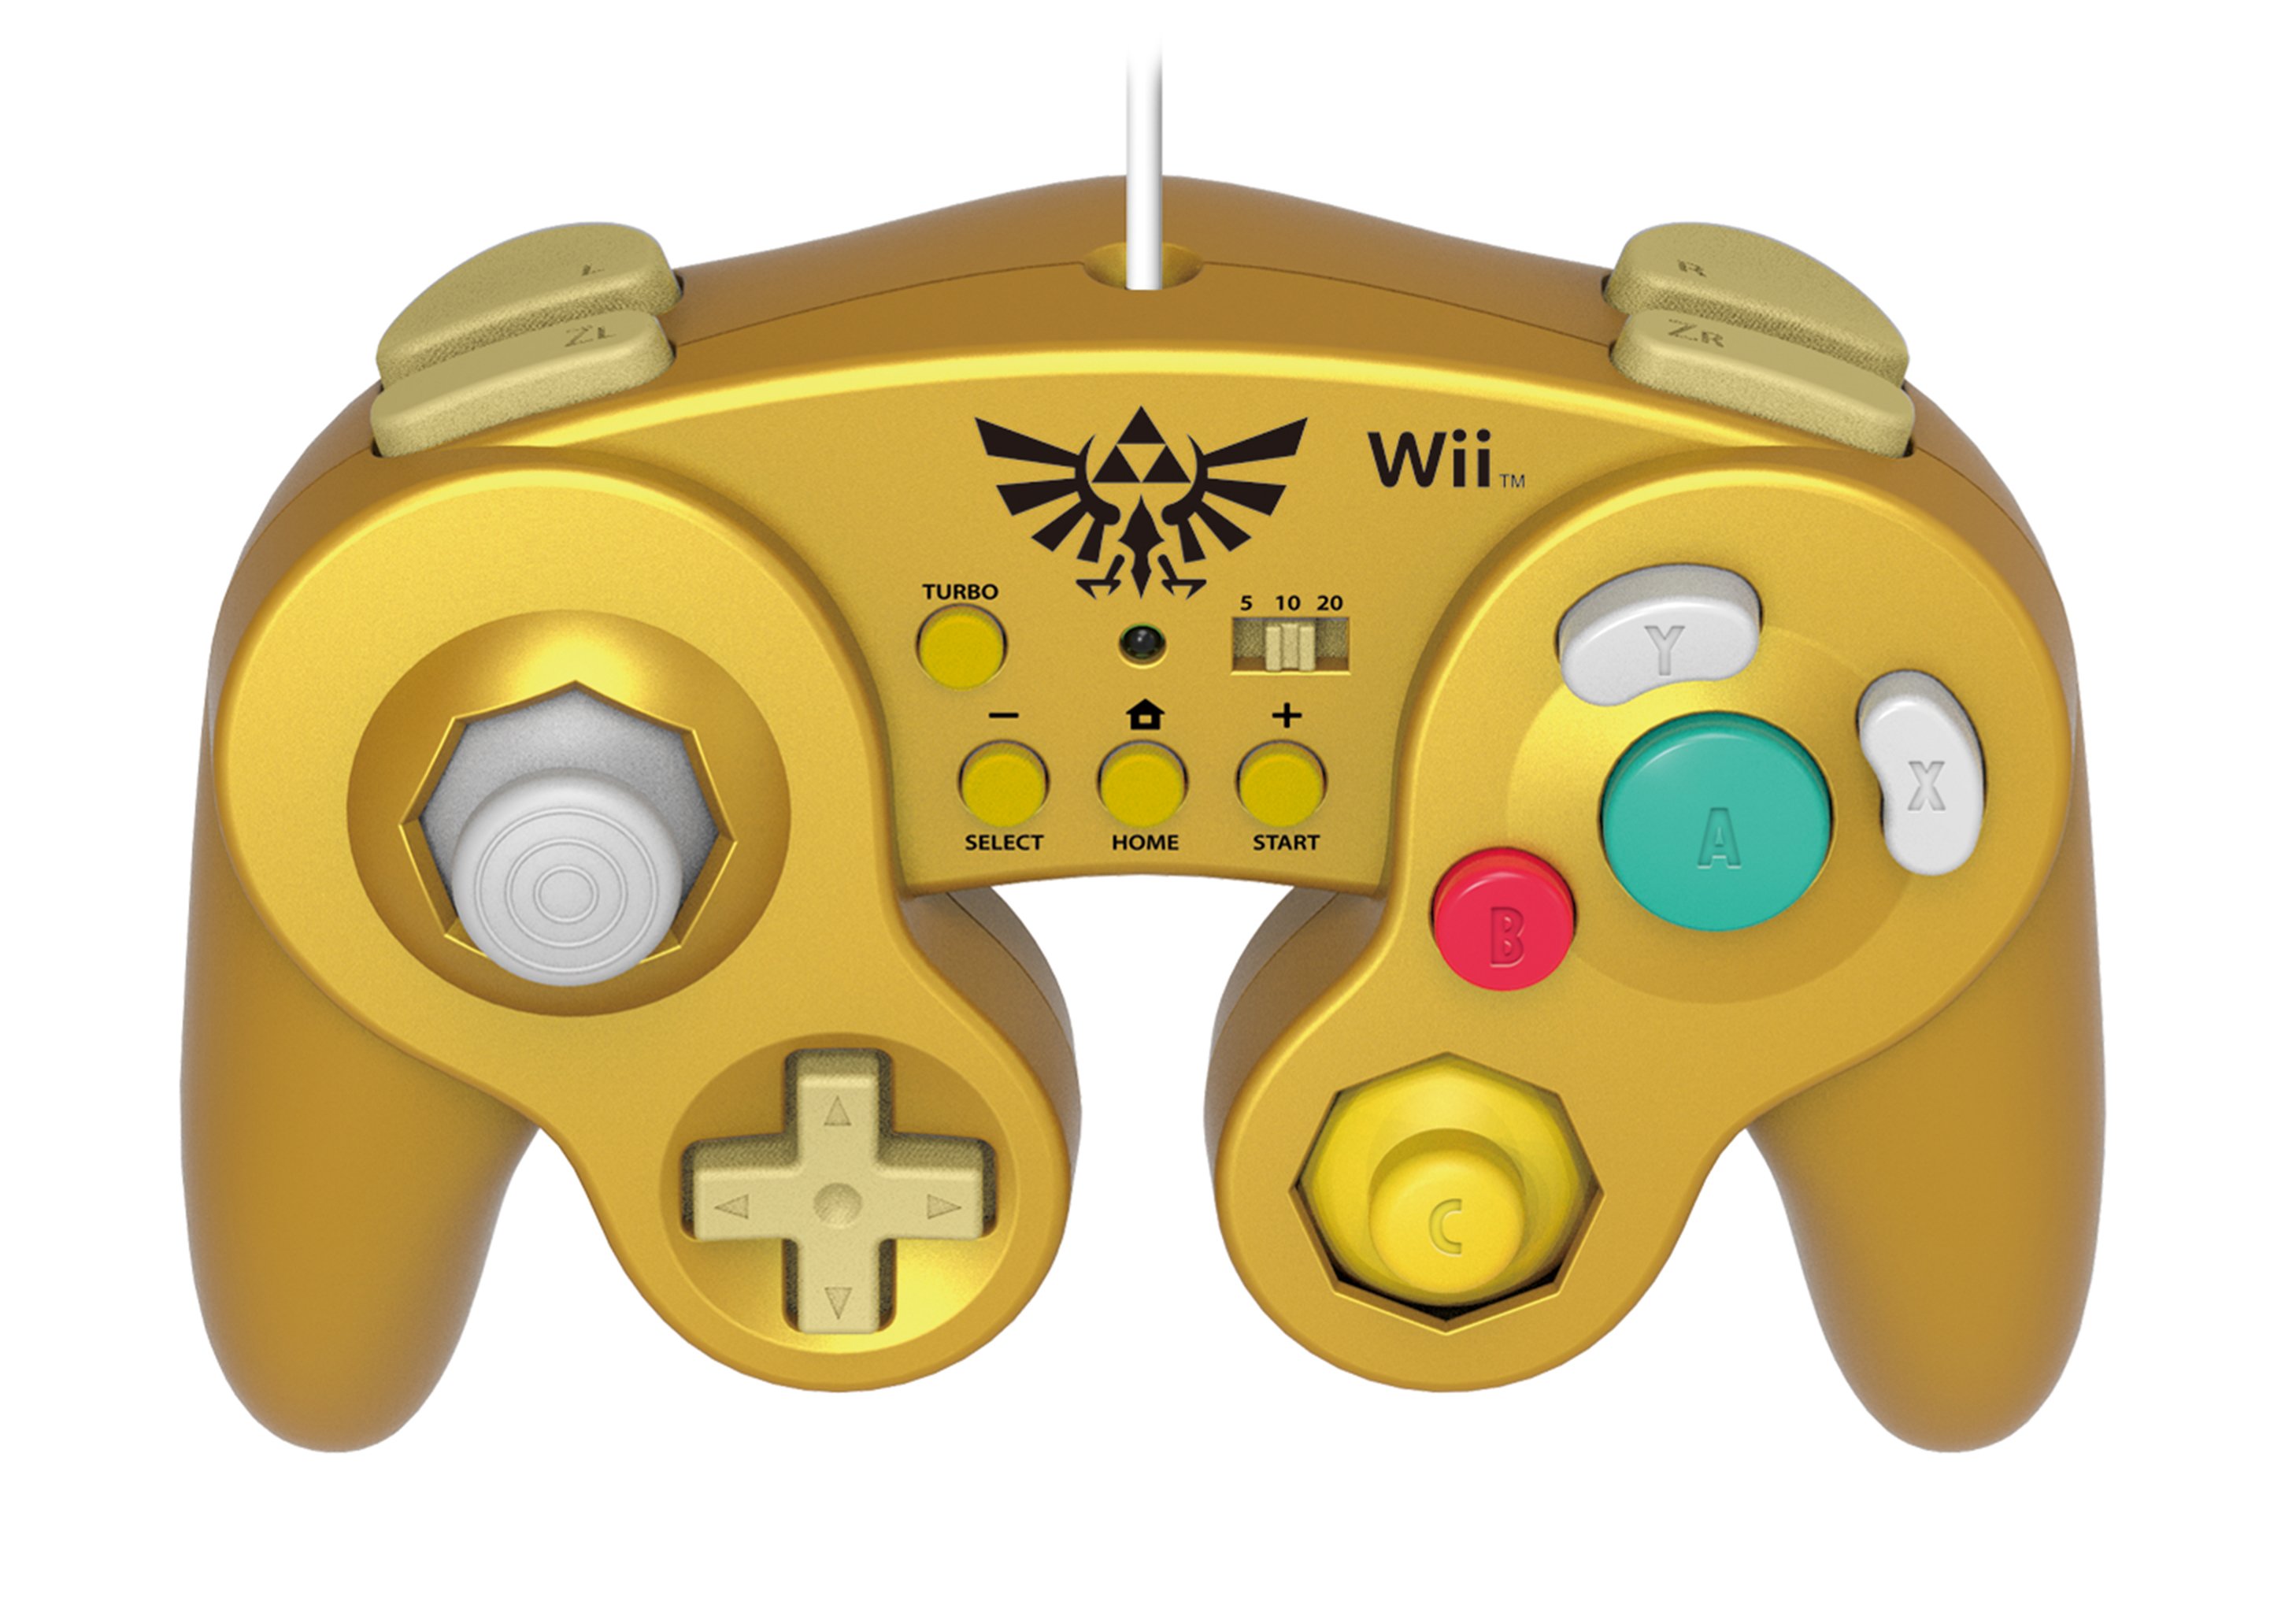 gamecube controller for wii u and pc